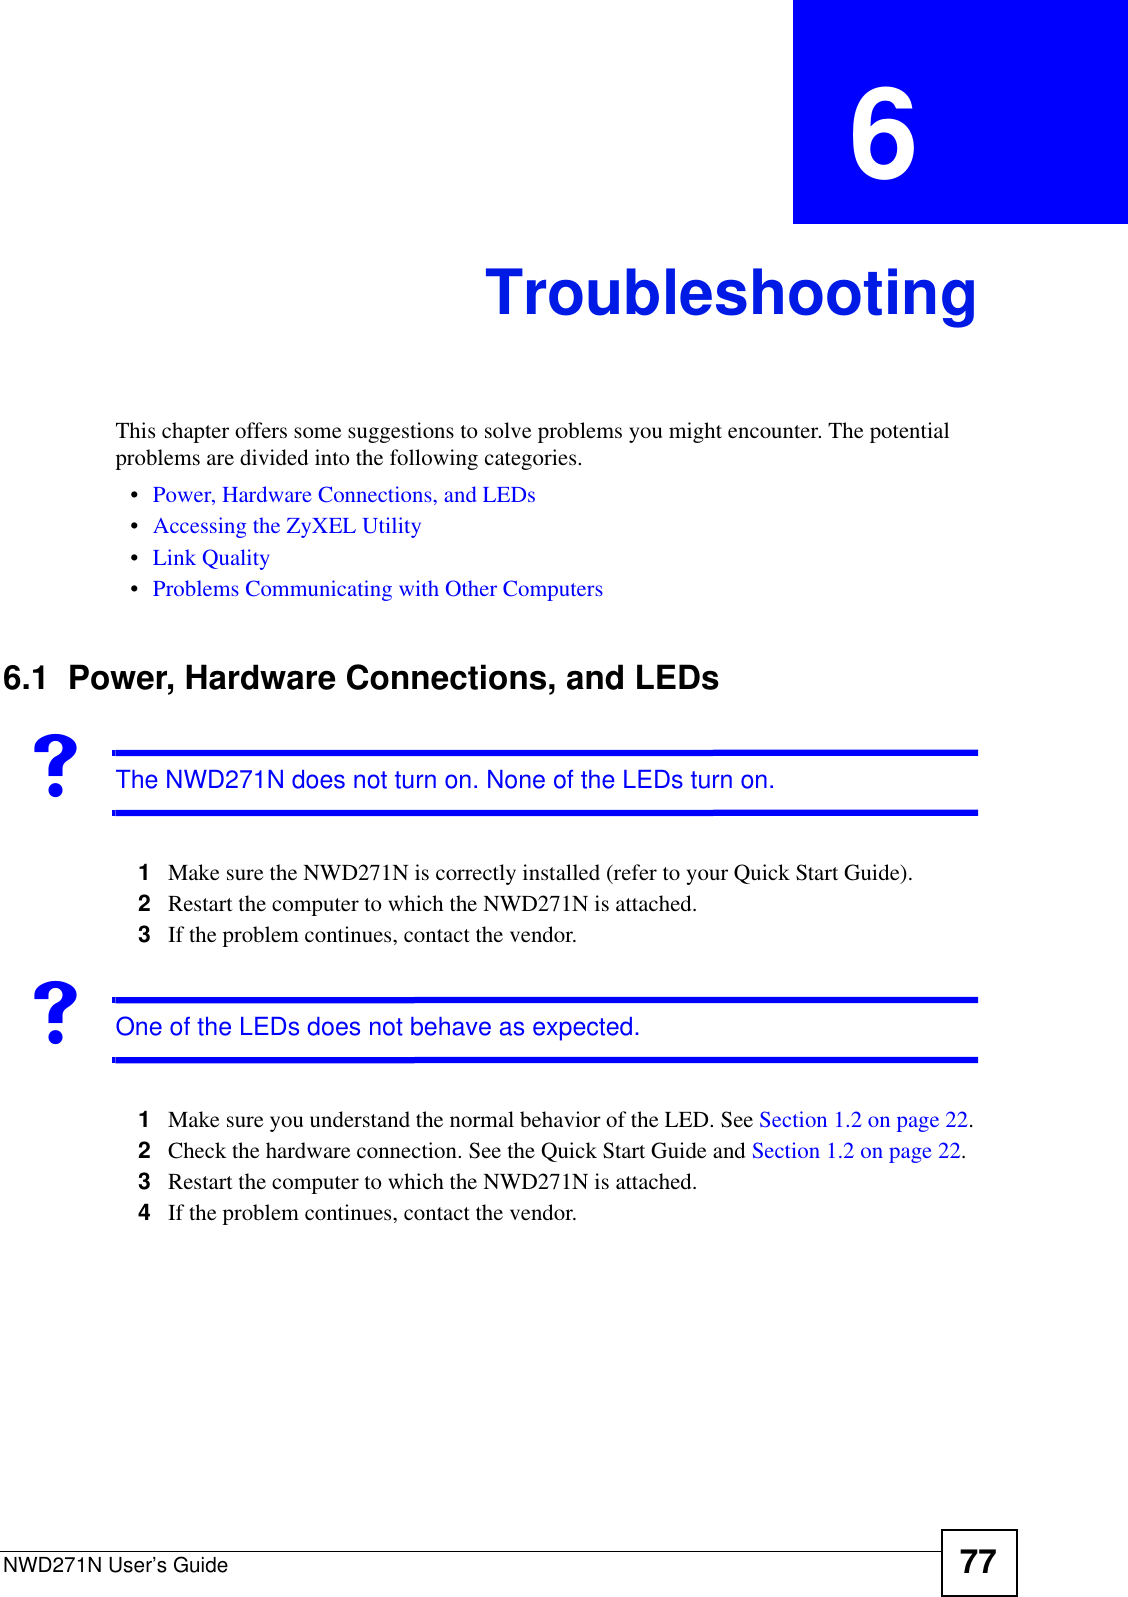 NWD271N User’s Guide 77CHAPTER  6 TroubleshootingThis chapter offers some suggestions to solve problems you might encounter. The potential problems are divided into the following categories. •Power, Hardware Connections, and LEDs•Accessing the ZyXEL Utility•Link Quality•Problems Communicating with Other Computers6.1  Power, Hardware Connections, and LEDsVThe NWD271N does not turn on. None of the LEDs turn on.1Make sure the NWD271N is correctly installed (refer to your Quick Start Guide).2Restart the computer to which the NWD271N is attached.3If the problem continues, contact the vendor.VOne of the LEDs does not behave as expected.1Make sure you understand the normal behavior of the LED. See Section 1.2 on page 22.2Check the hardware connection. See the Quick Start Guide and Section 1.2 on page 22. 3Restart the computer to which the NWD271N is attached.4If the problem continues, contact the vendor.